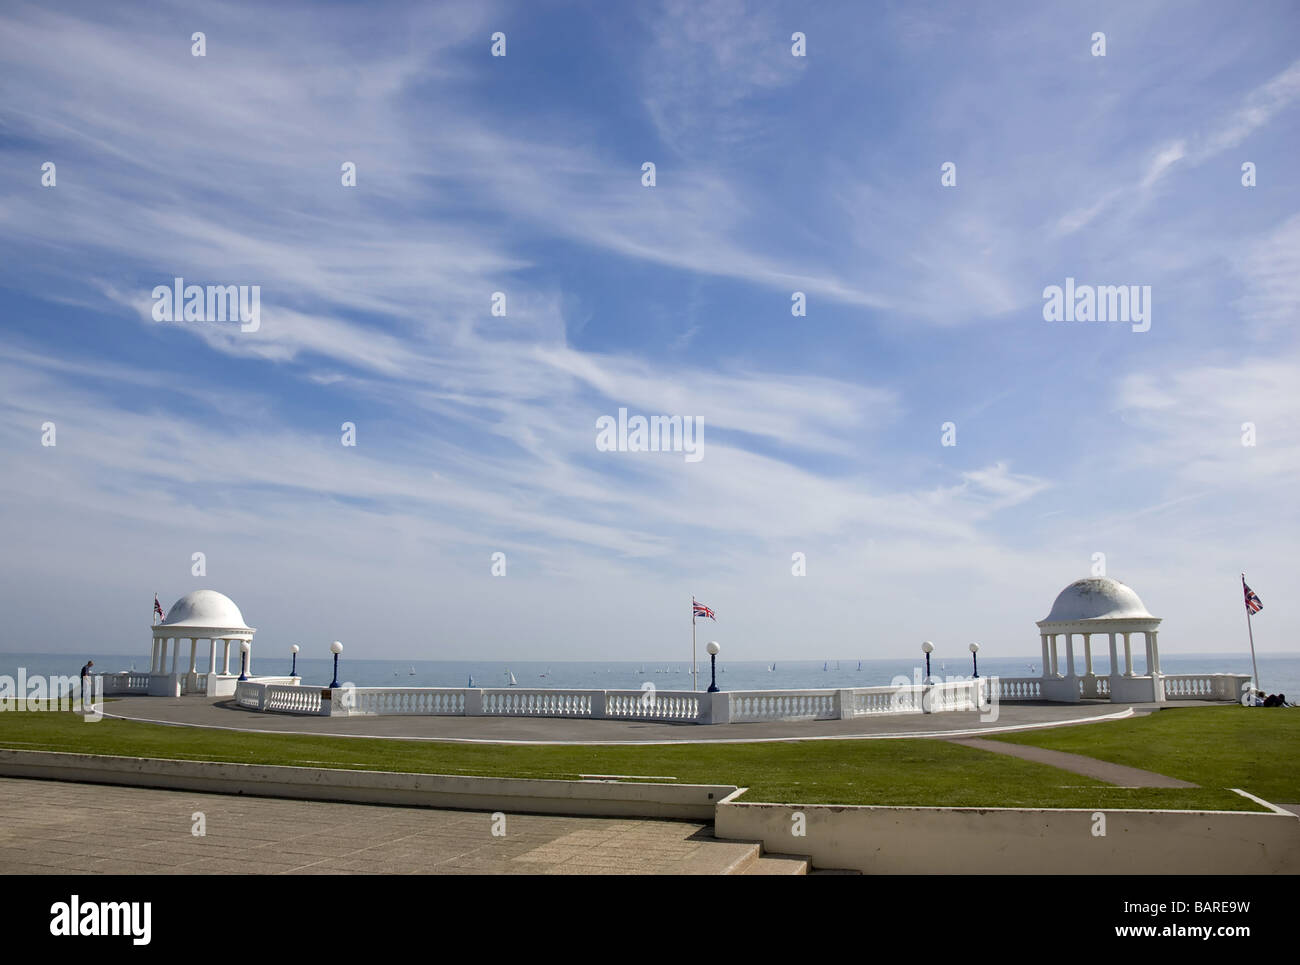 A promenade with two domed buildings Stock Photo